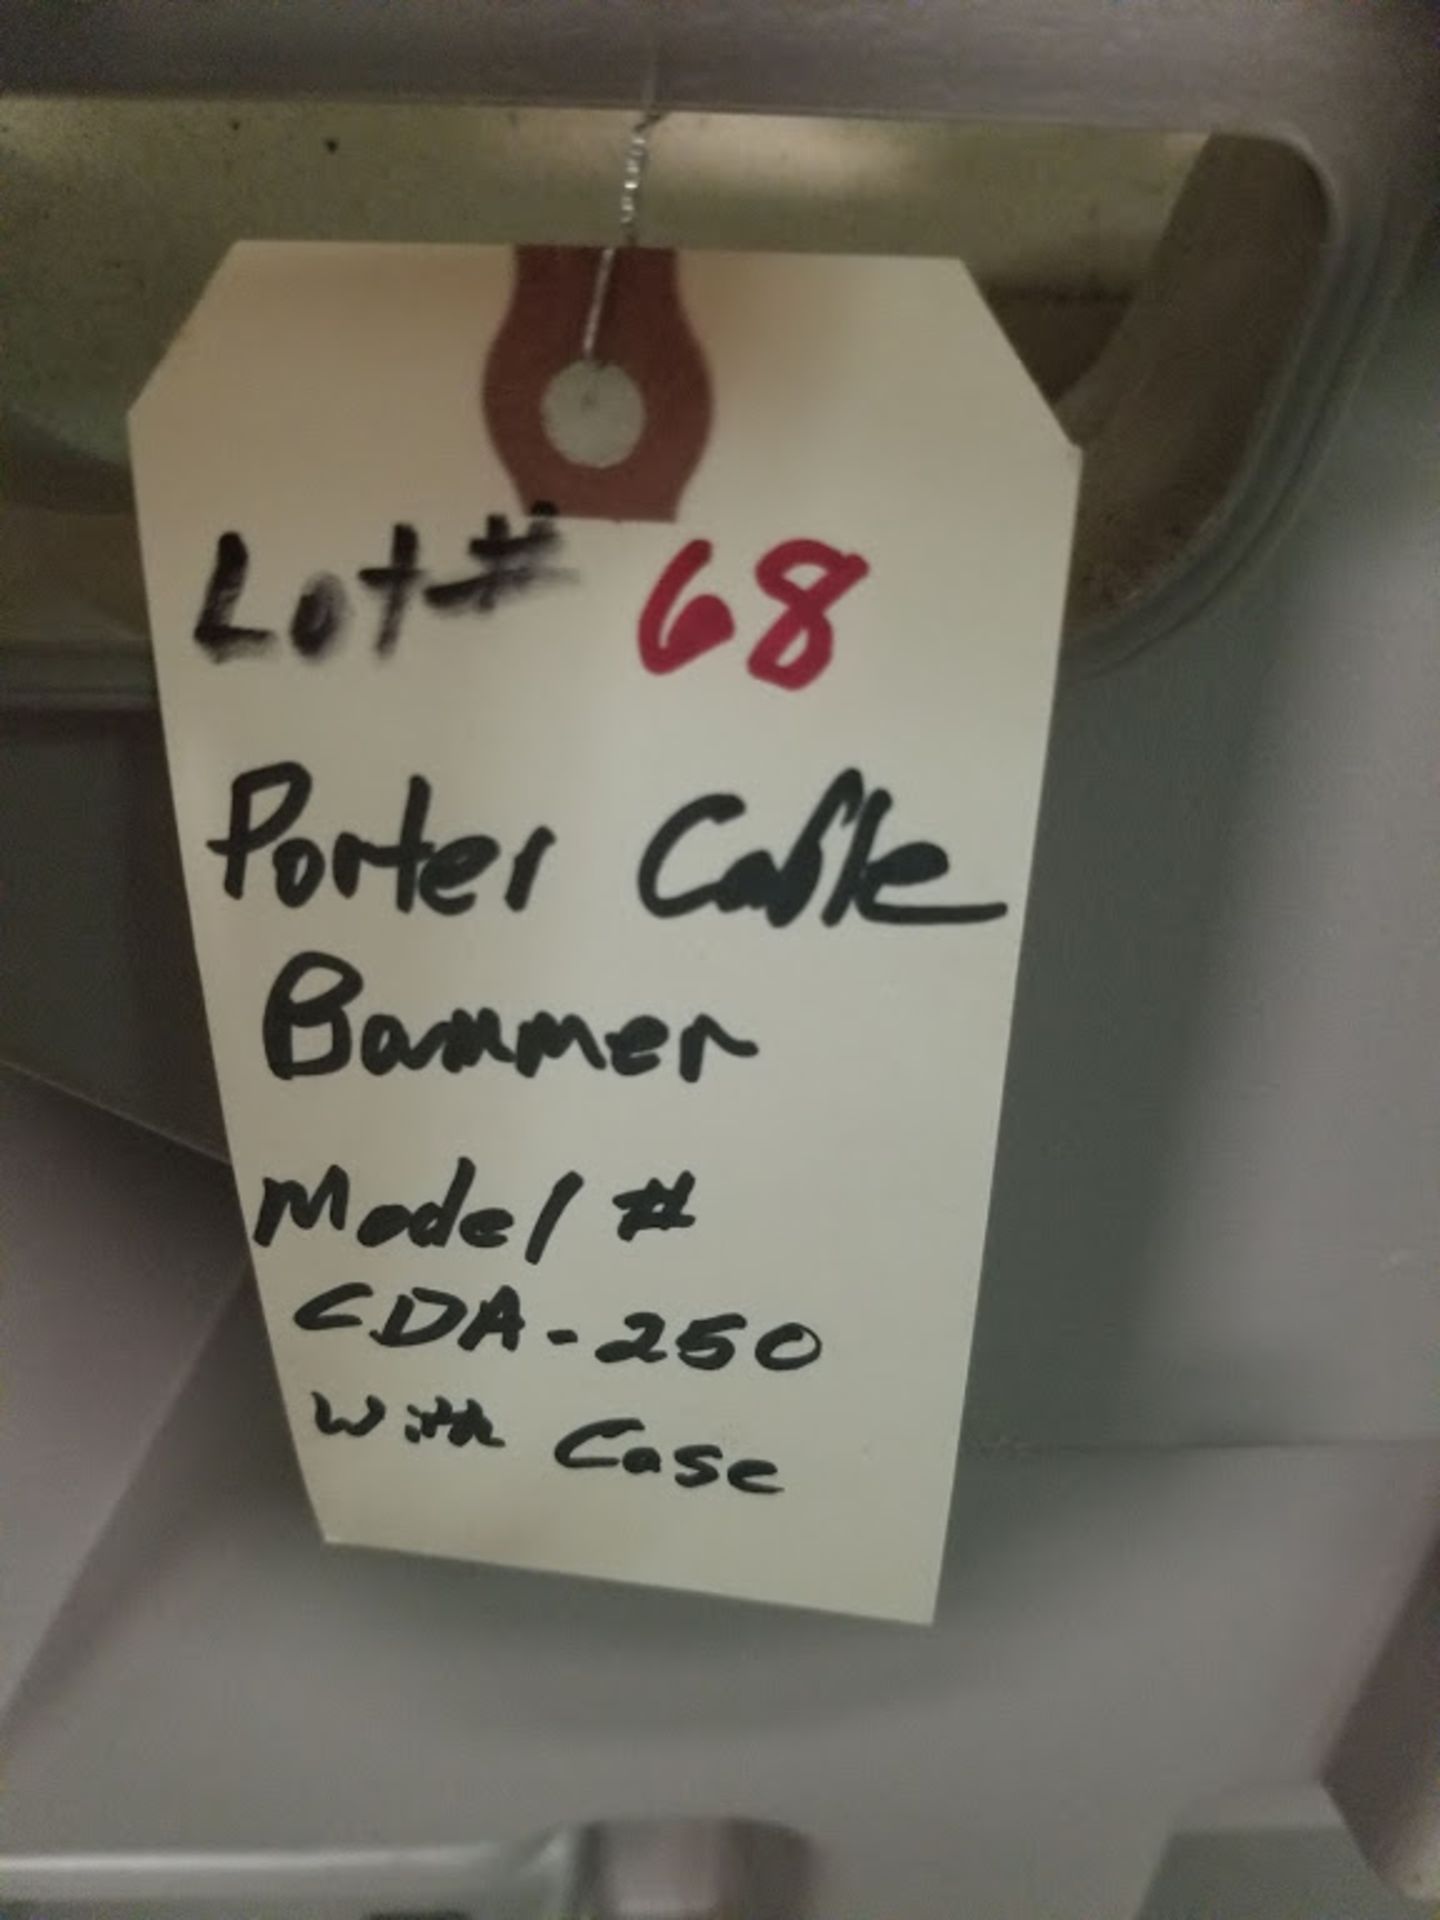 Porter Cable Bammer Model: CDA250 w/ Case - Image 3 of 3